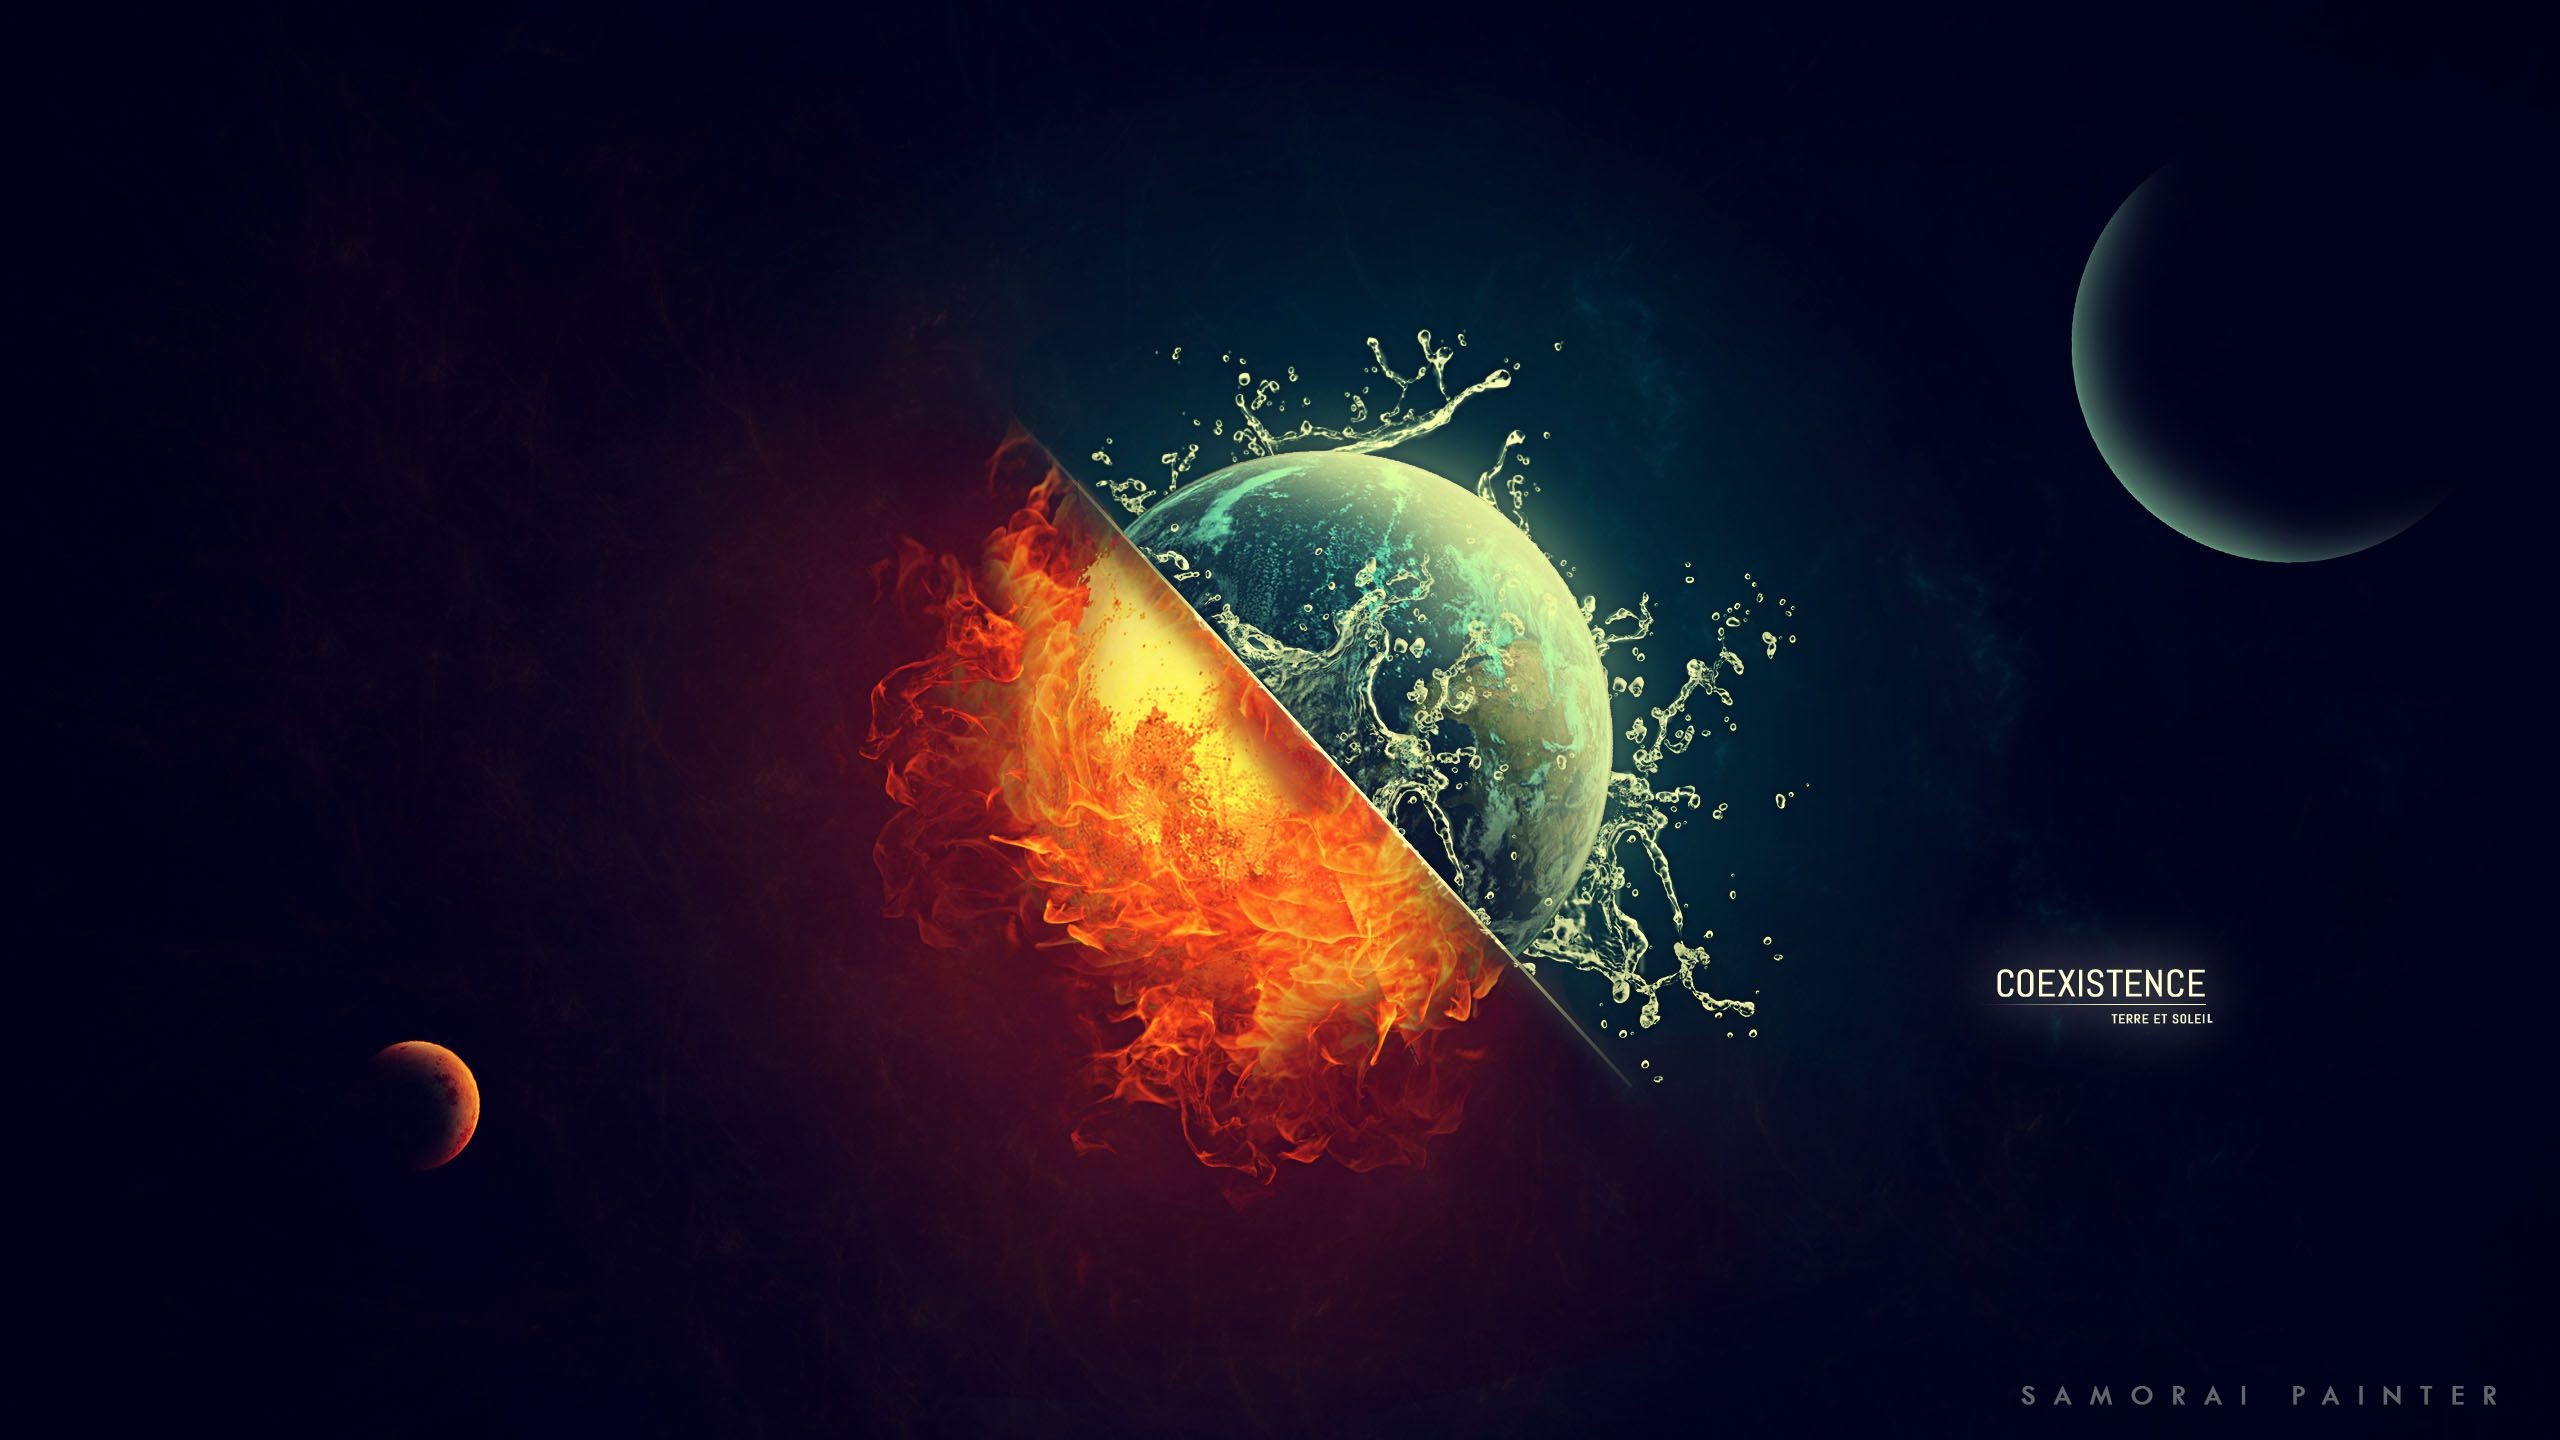 General 2560x1440 digital art space universe planet Sun Moon Earth fire burning water splashes coexist ice